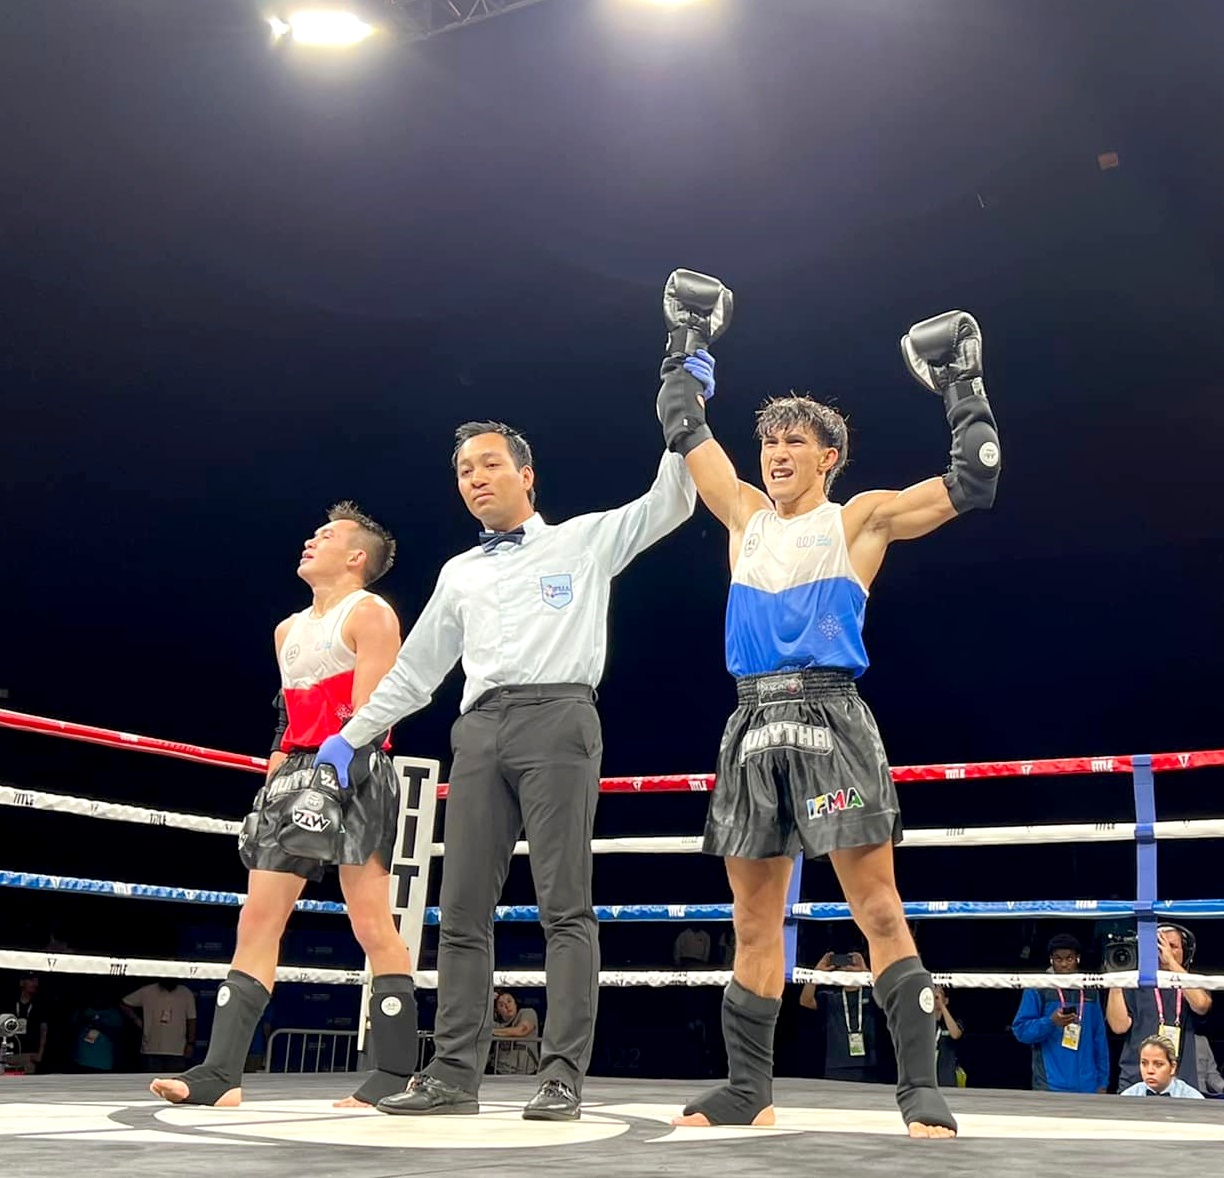 Vietnamese fighter Nguyen Tran Duy Nhat (R) is declared as the champion of the men’s 57-kilogram Muay Thai at the 11th World Games in Birmingham, Alabama, USA, July 18, 2022 after defeating Almaz Sarsembekov of Kazakhstan. Photo: Facebook Nguyen Tran Duy Nhat